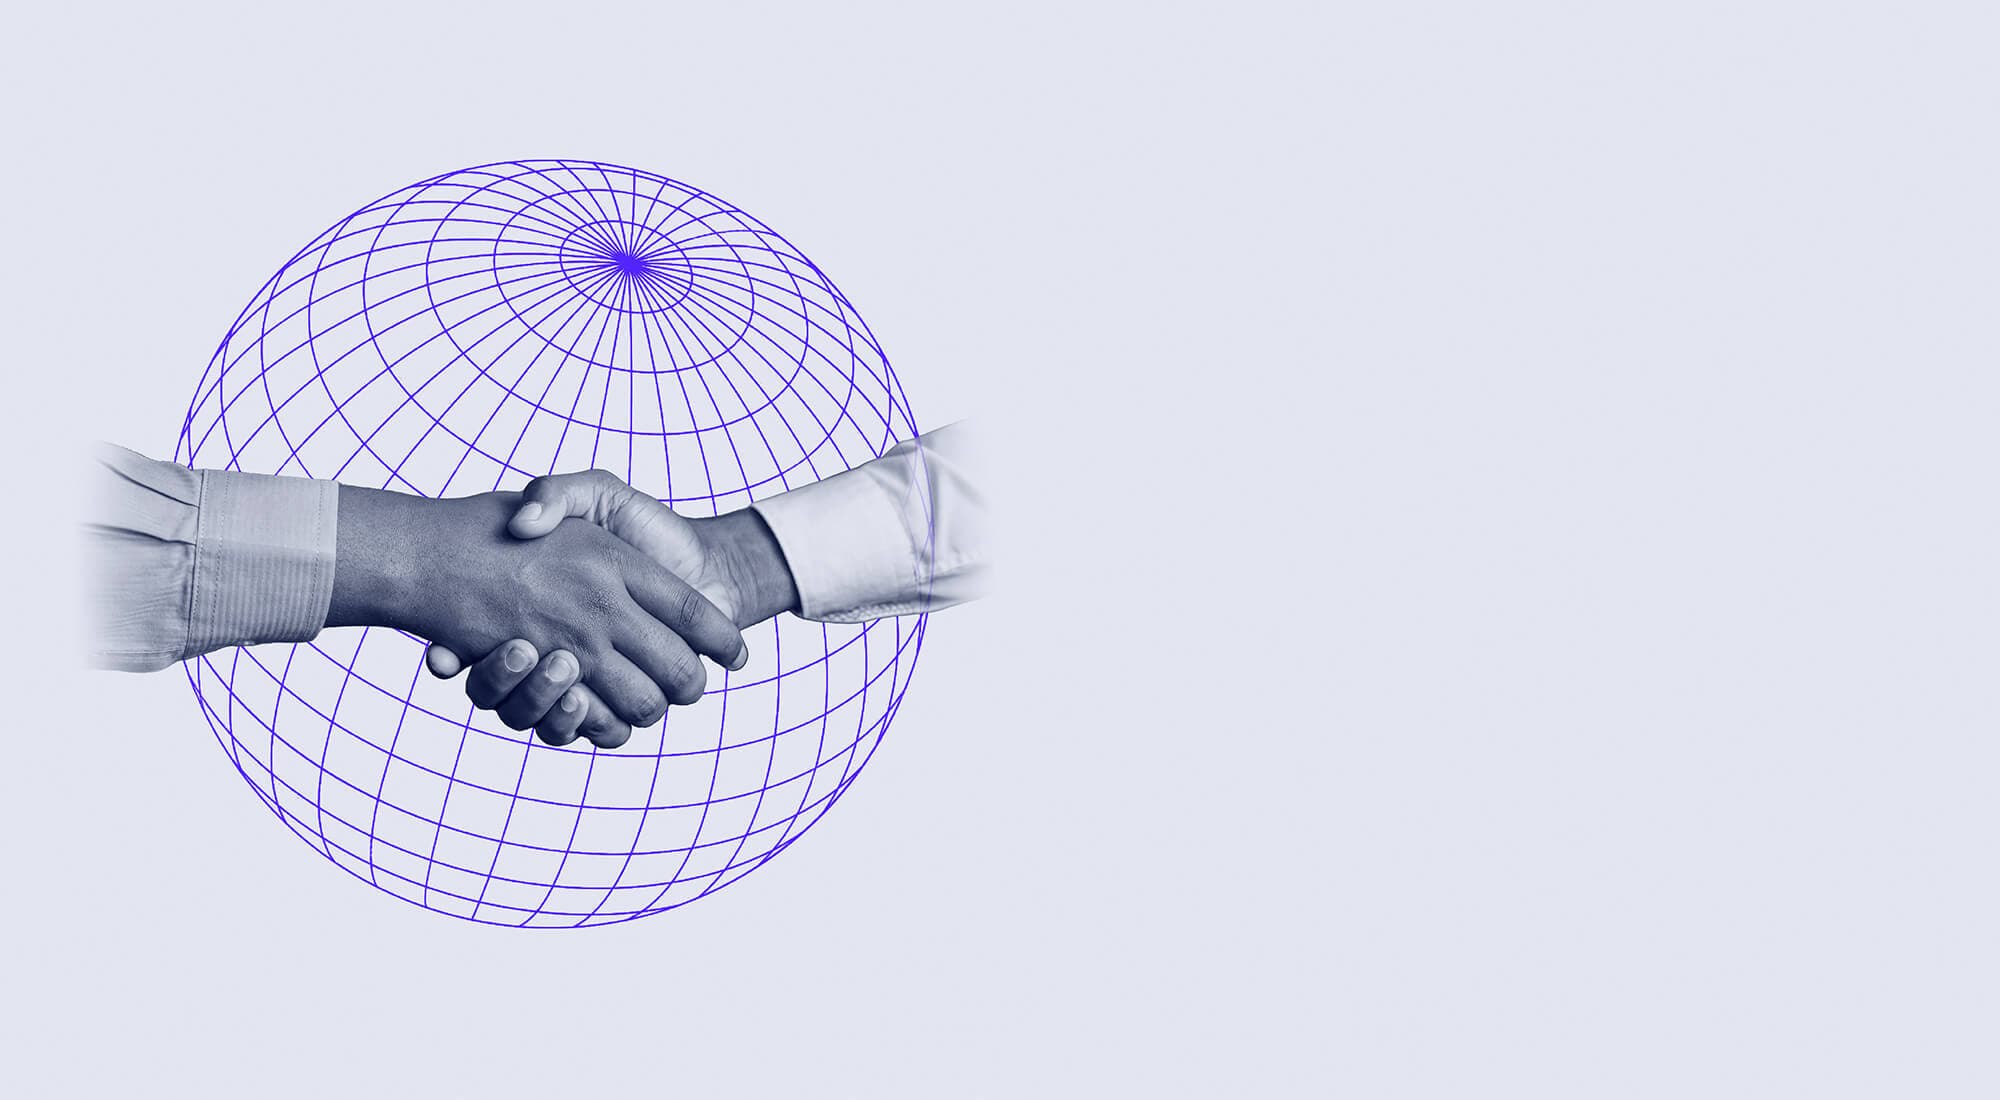 Two people shaking hands in front of an illustrative globe.